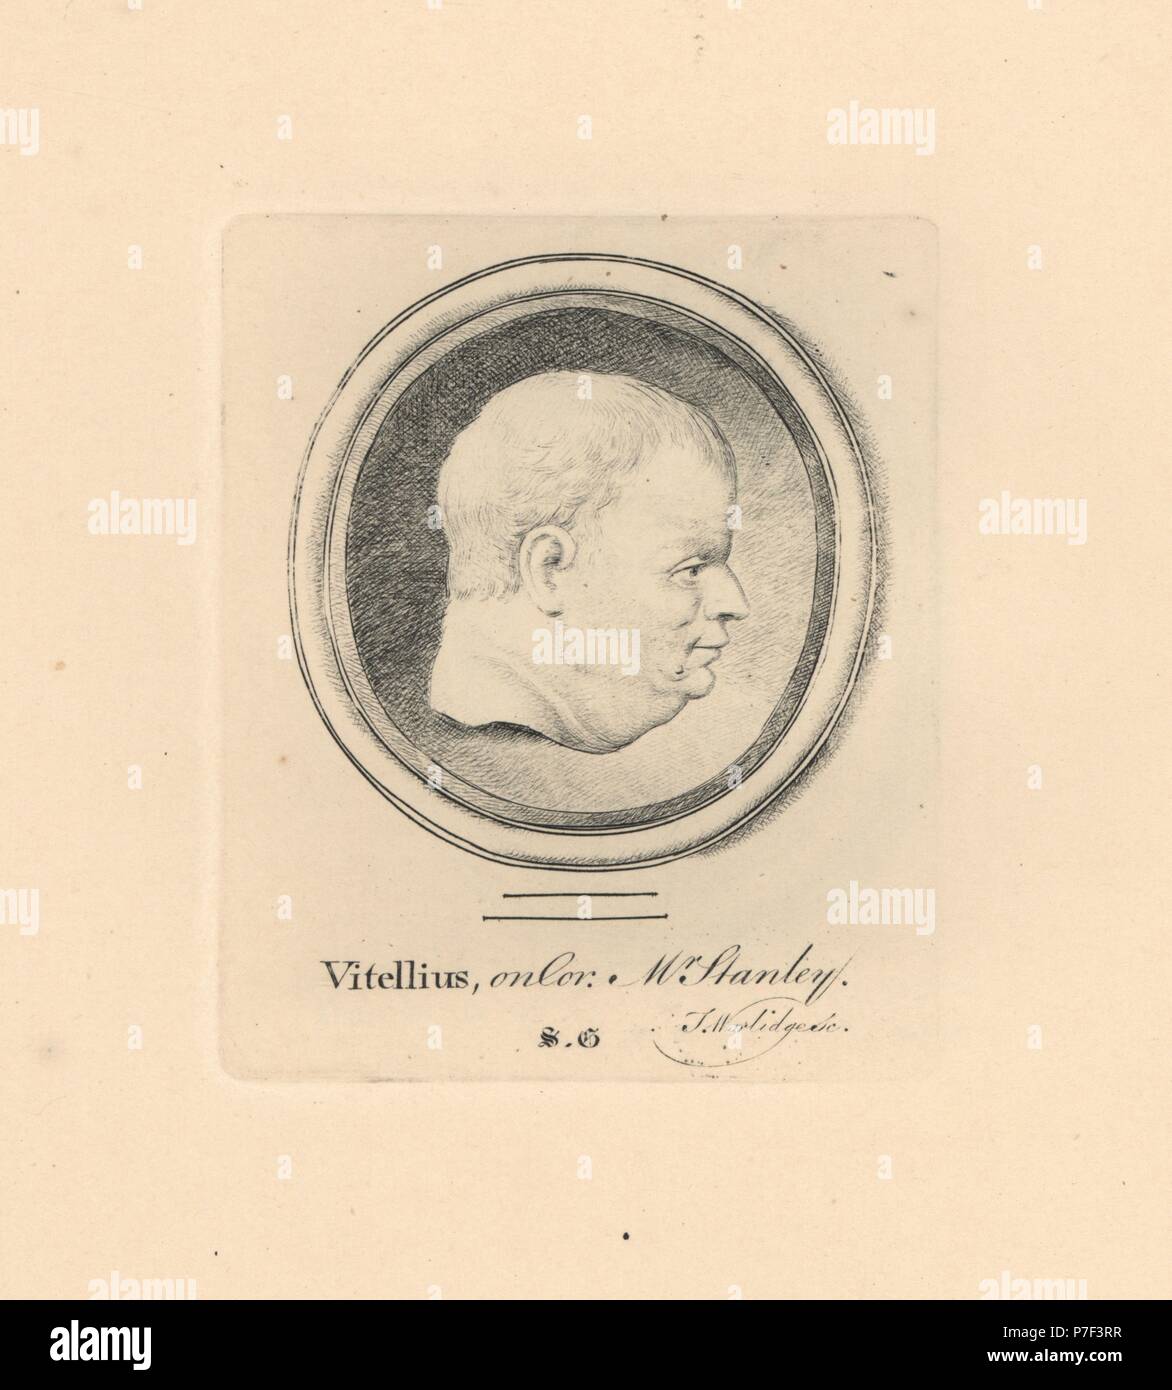 Portrait of Vitellius, Roman Emperor, on cornelian, in the collection of Mr Stanley. Copperplate engraving by Thomas Worlidge from James Vallentin's One Hundred and Eight Engravings from Antique Gems, 1863. Stock Photo